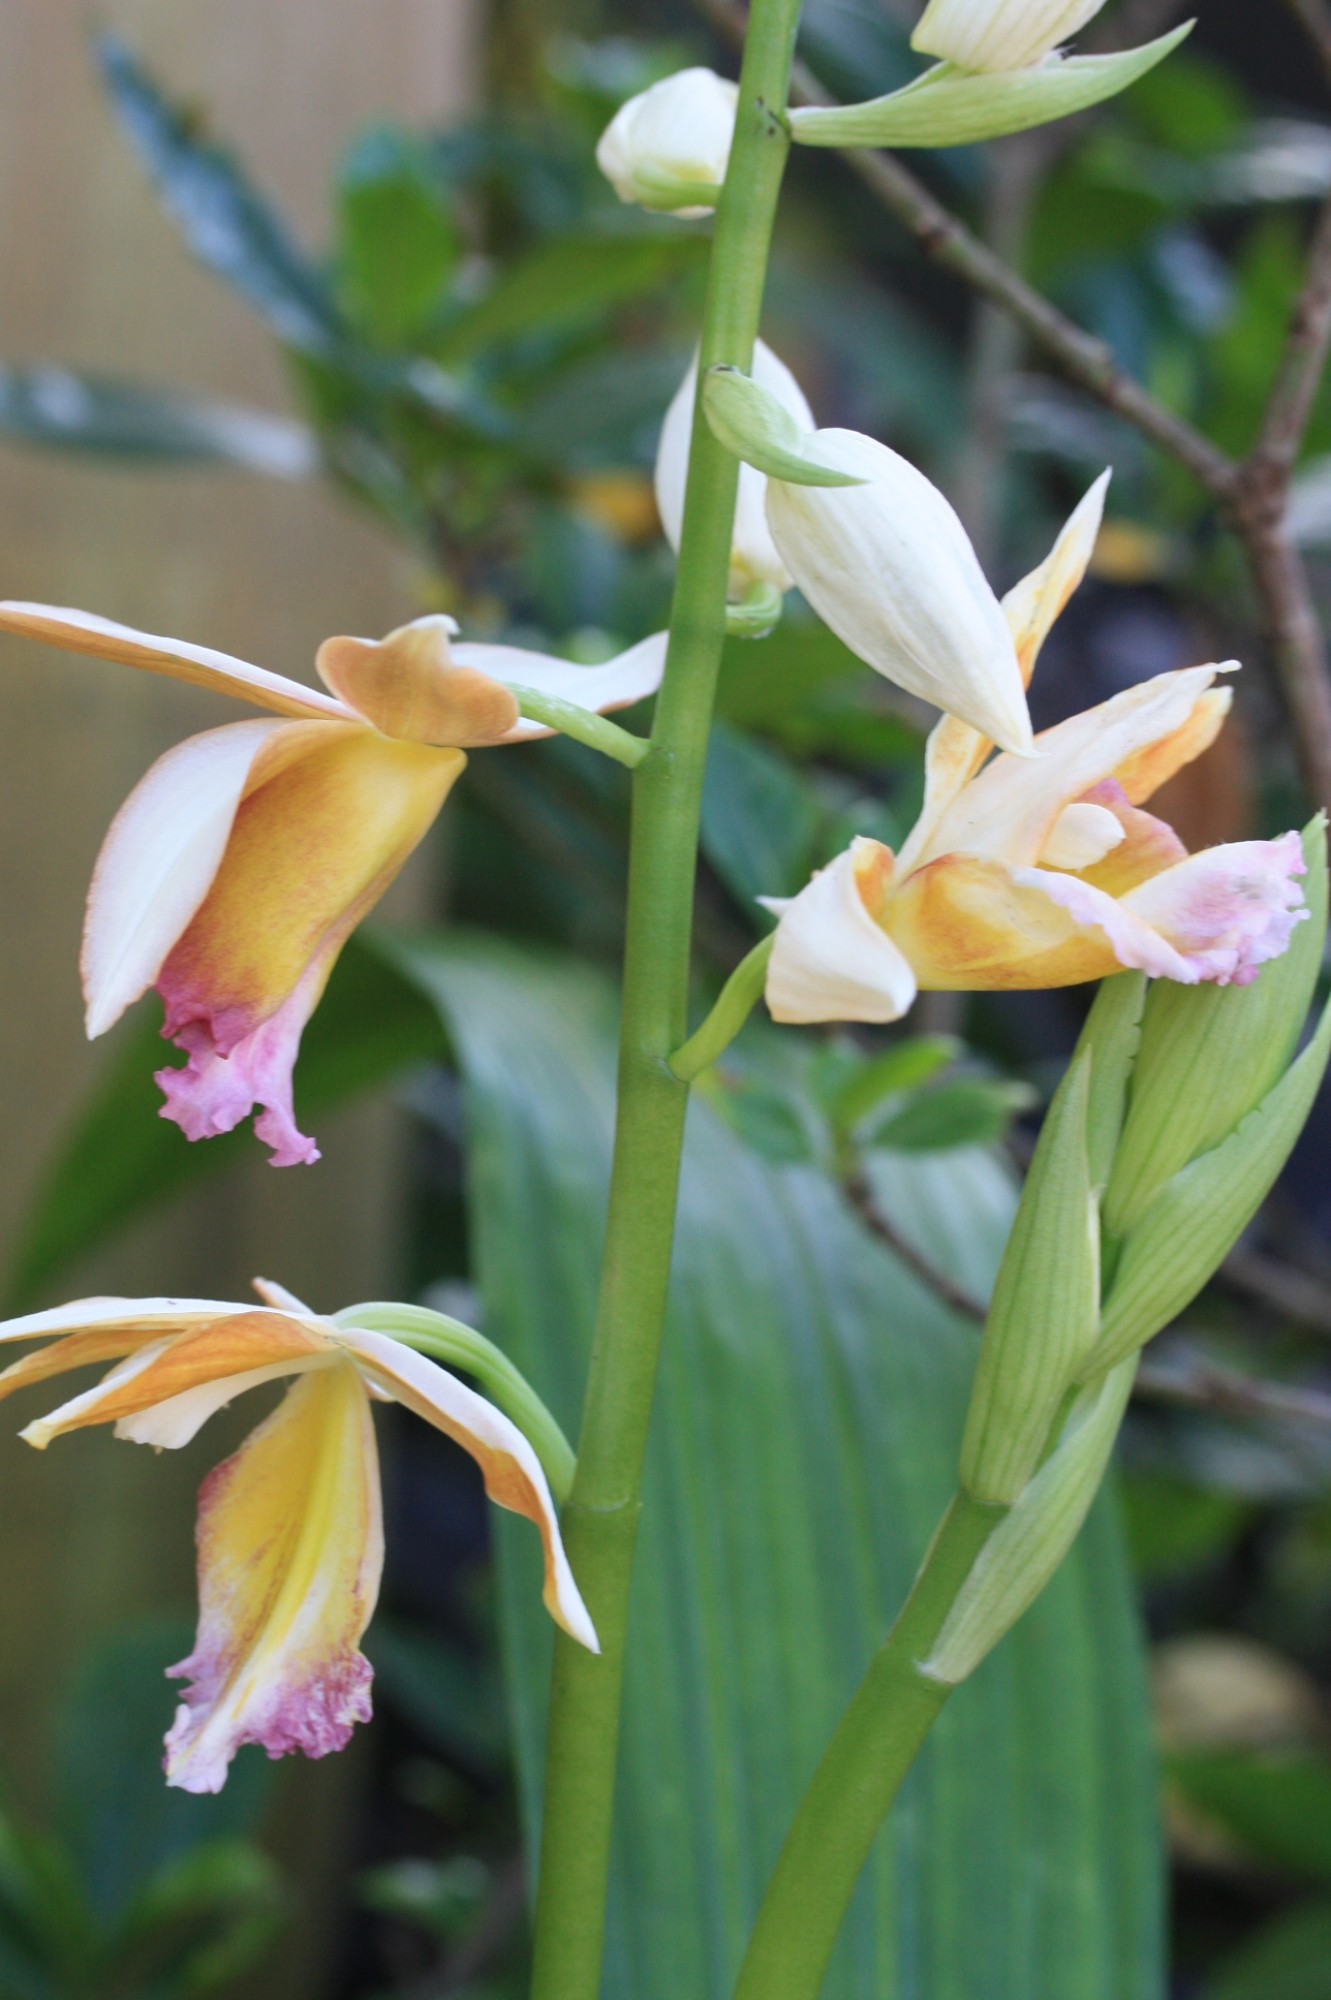 x Gastrophaius Dan Rosenberg 'Tropical Ice' (Tropical Ice intergeneric orchid), Conservatory, February 2016. Photo by Leslie Hunter.